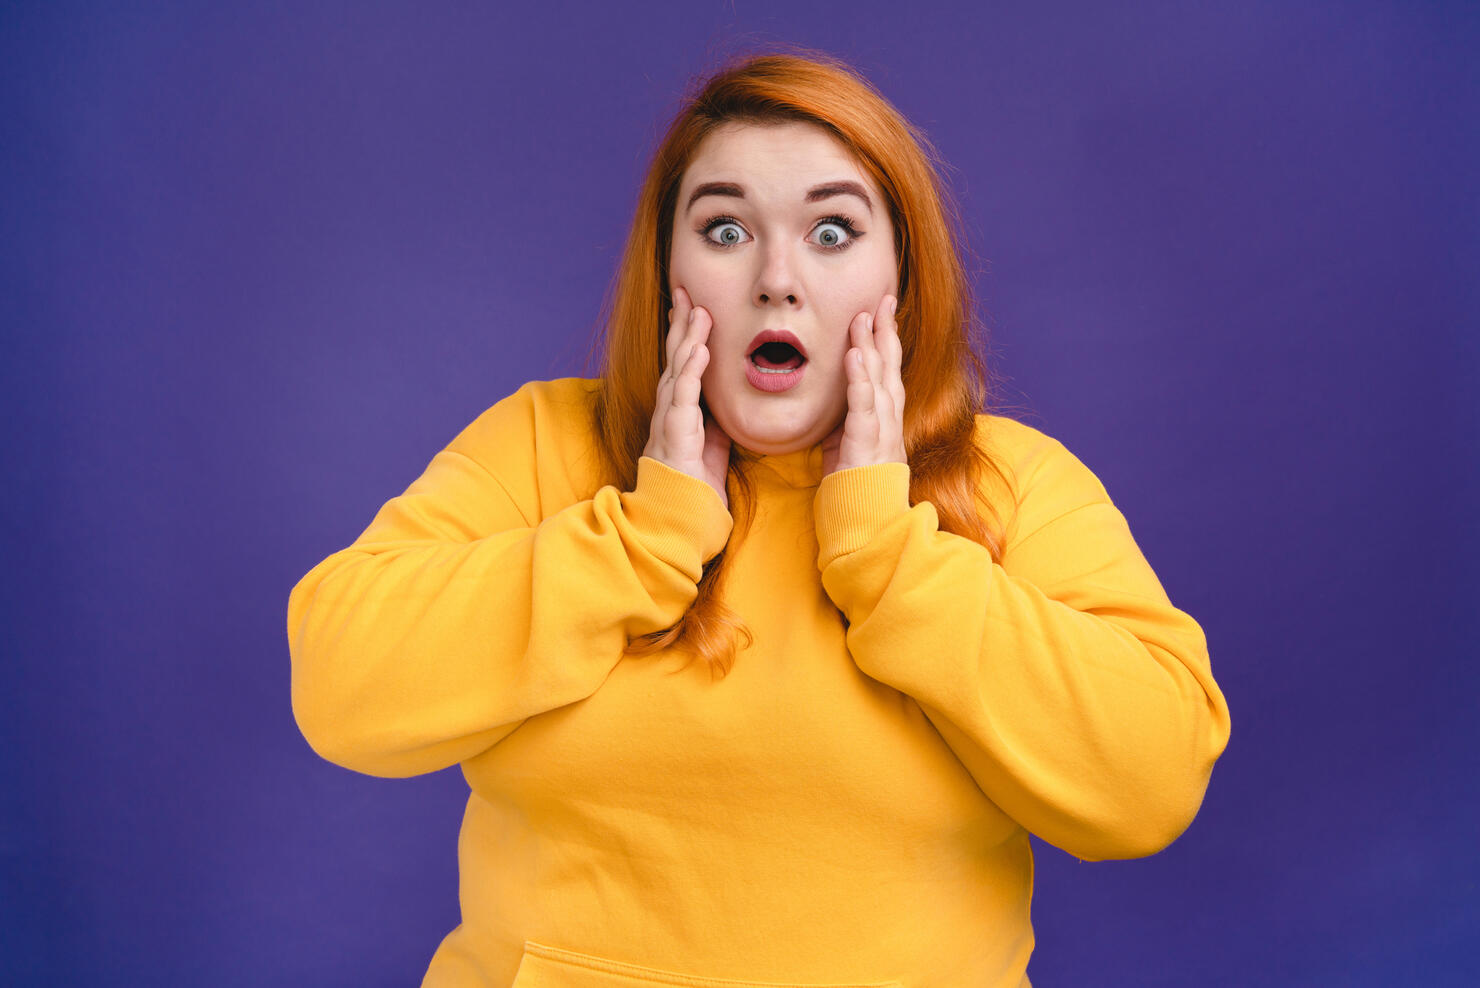 Shocked plump woman in casual outfit isolated in blue background